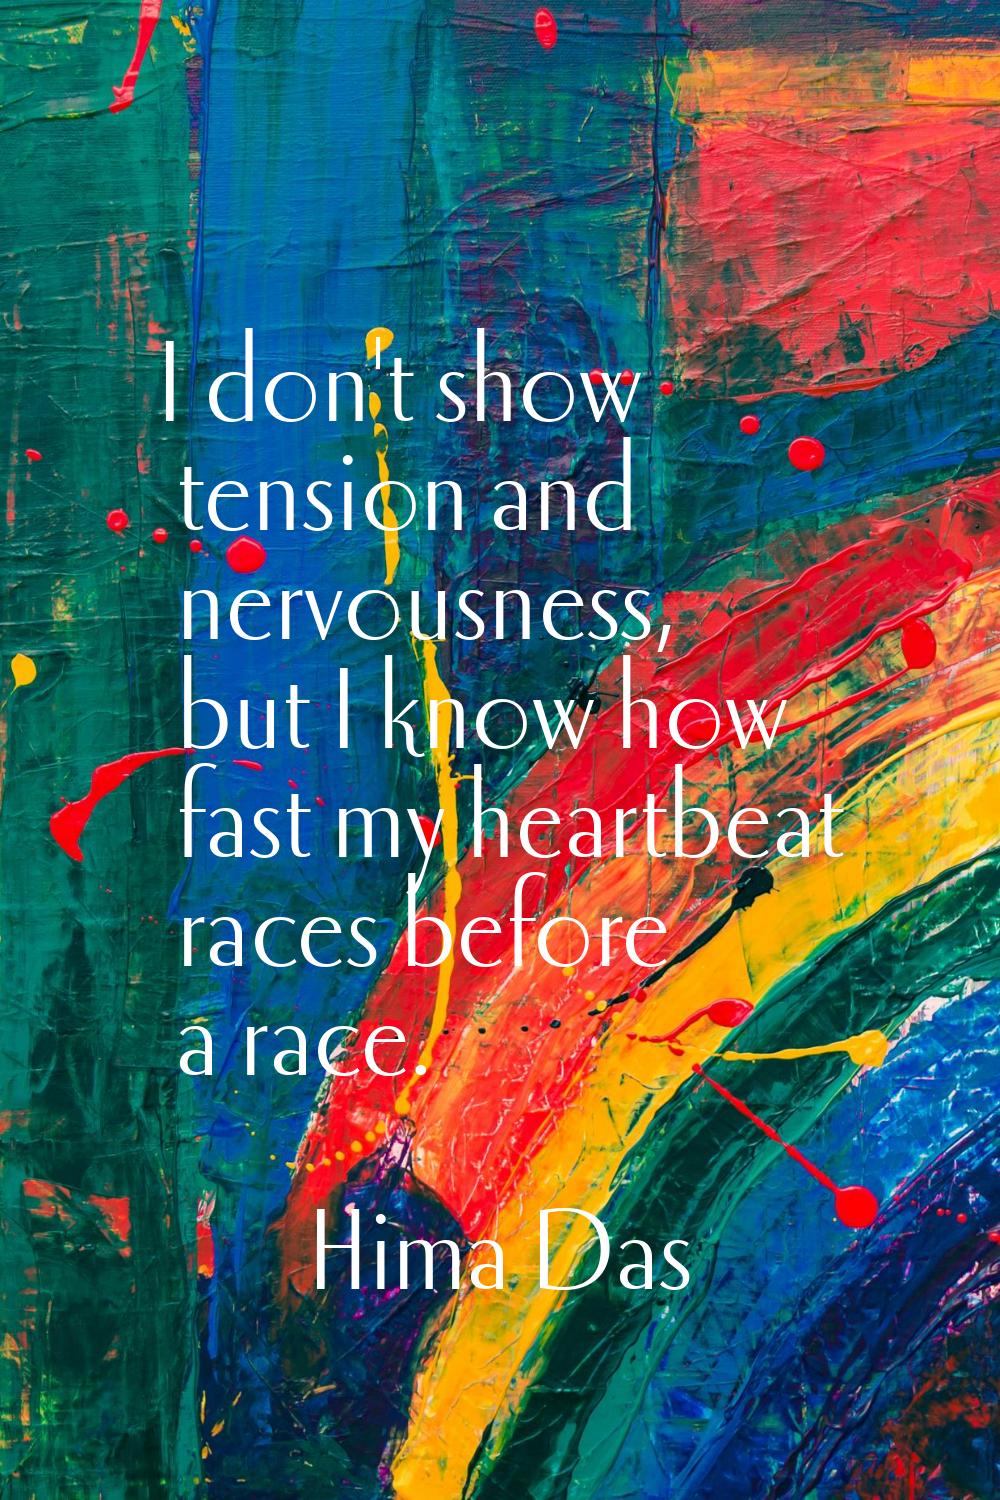 I don't show tension and nervousness, but I know how fast my heartbeat races before a race.